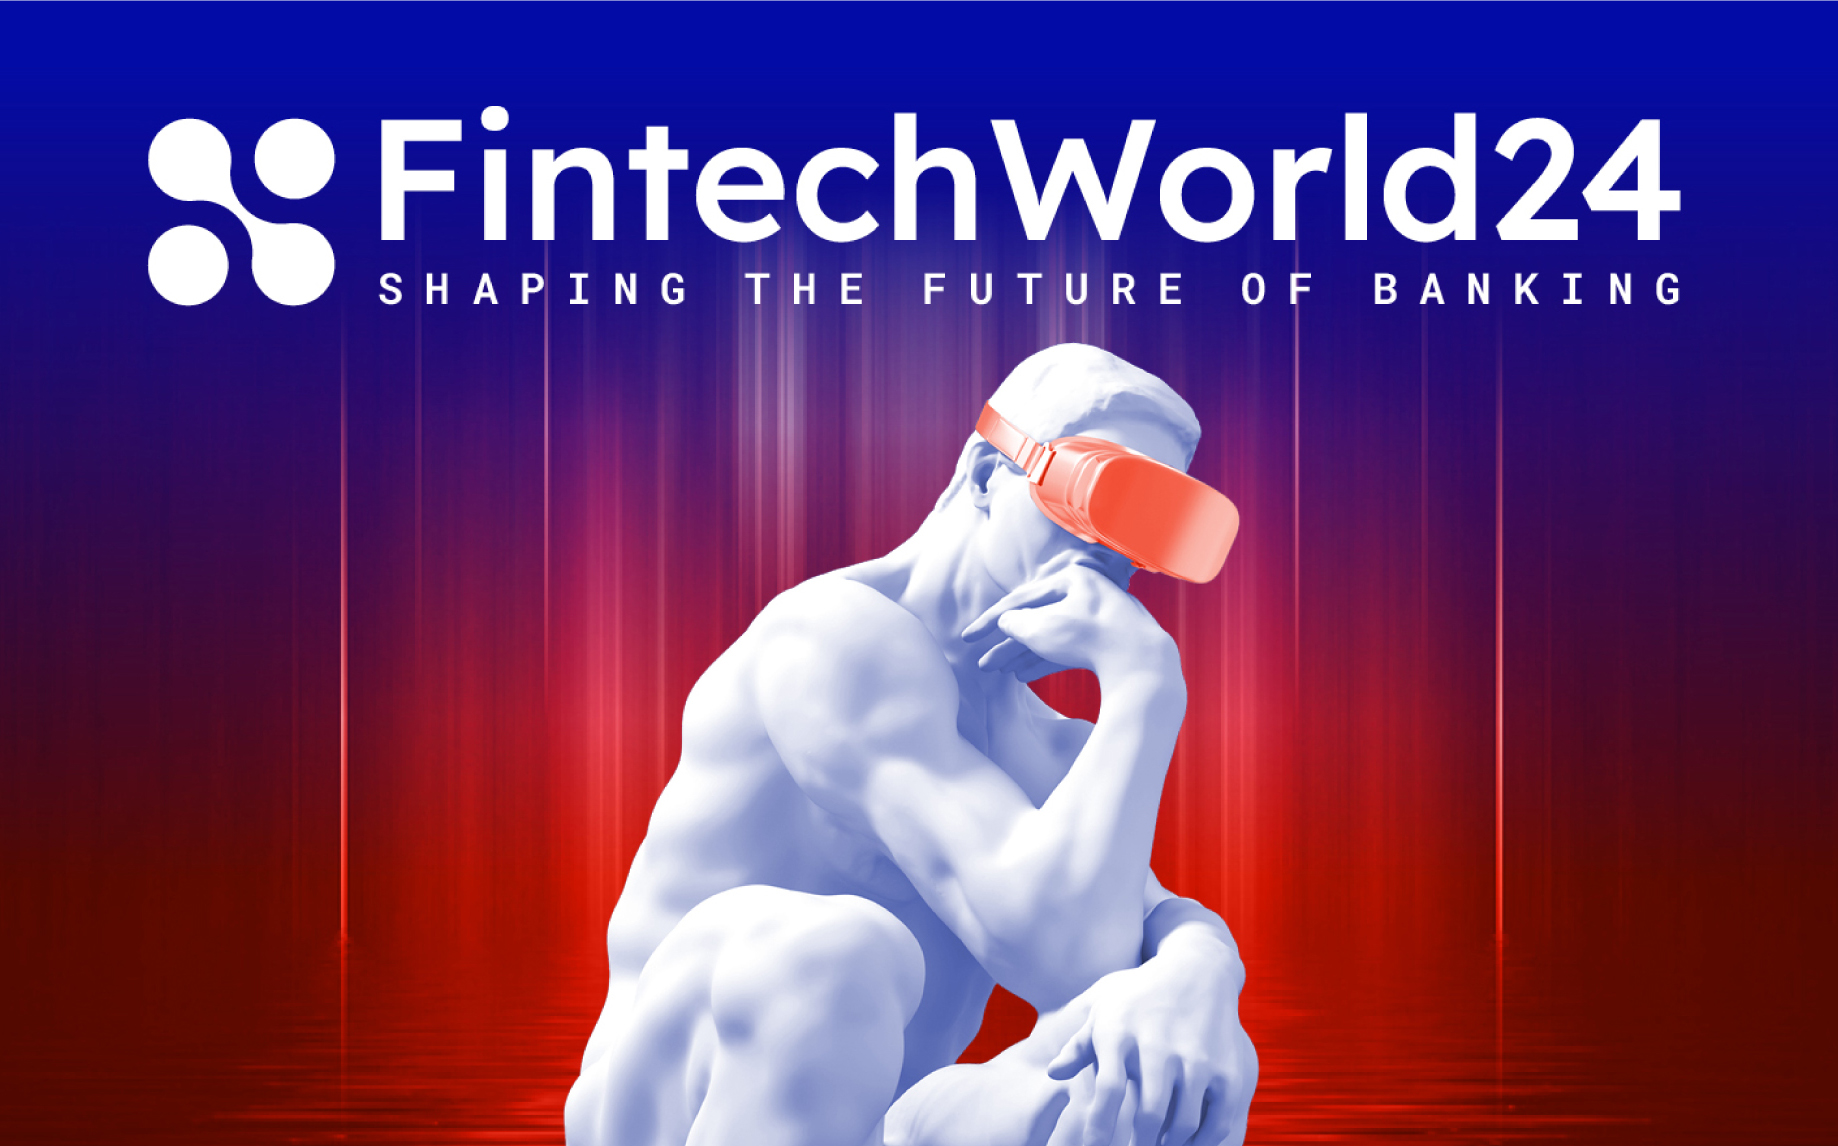 Cover photo for a fintech event, with a male sculpture with VR glasses in front and a background title "FintechWorld 2024"